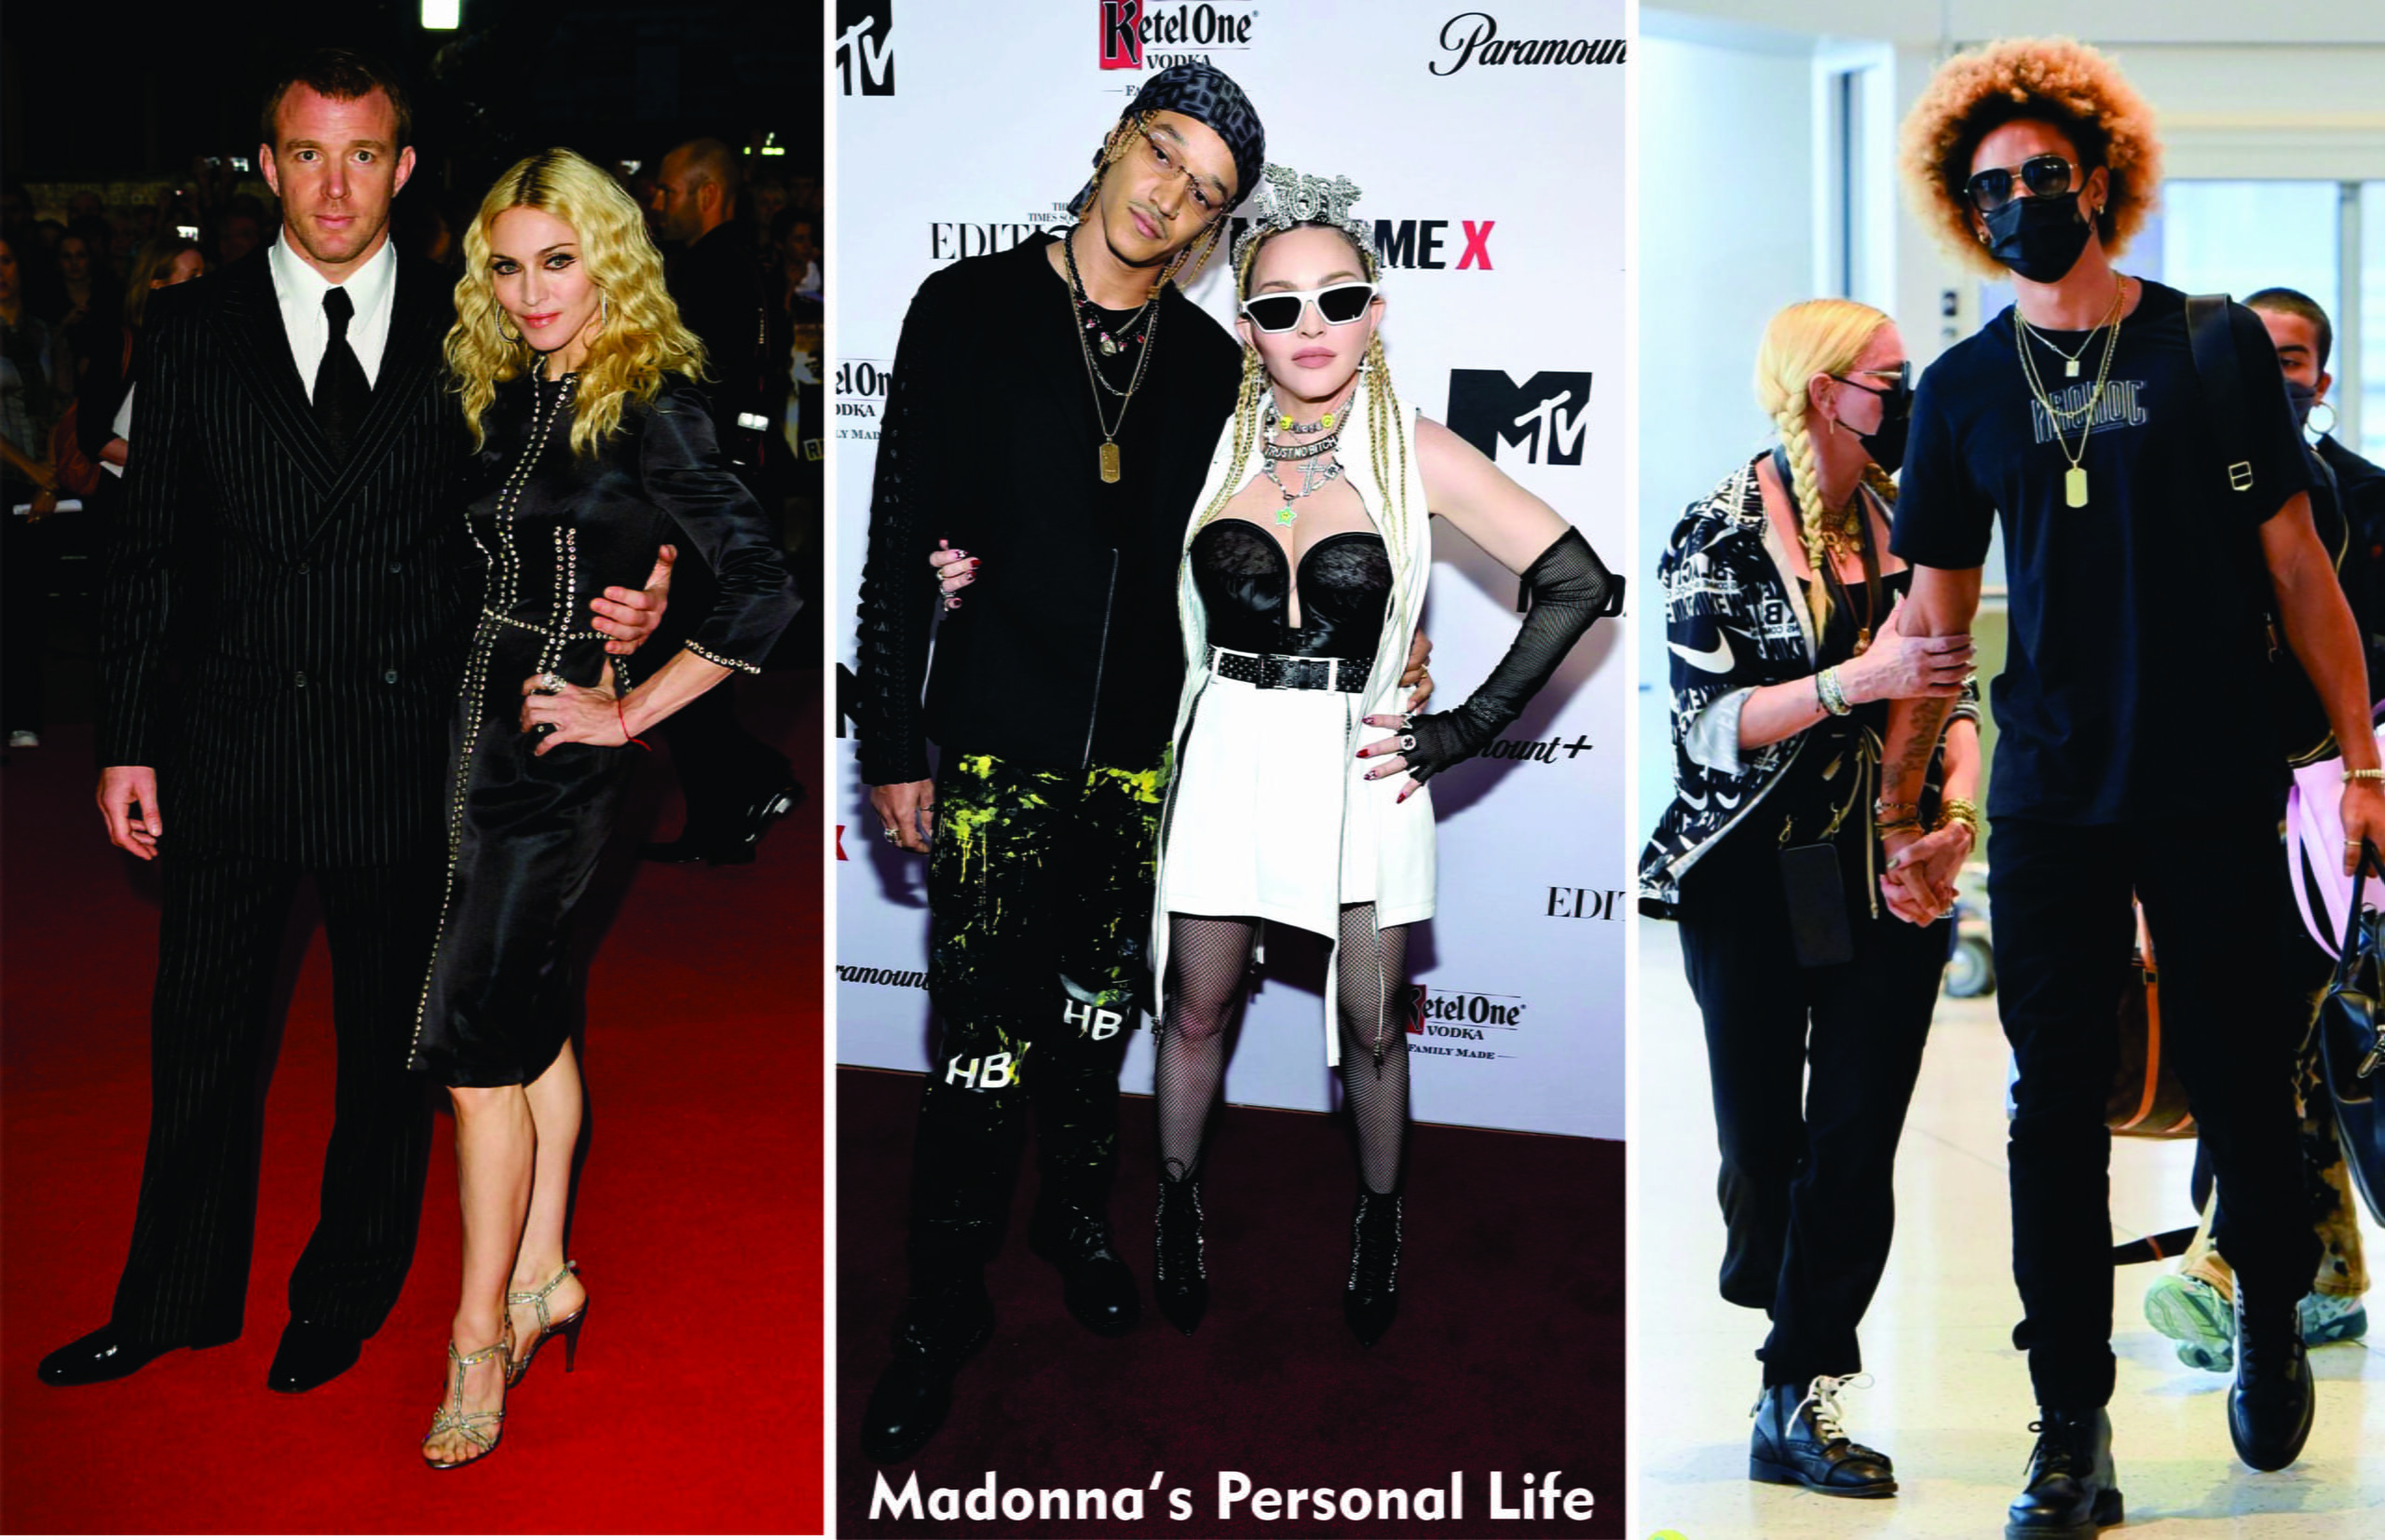 Madonna's Personal Life